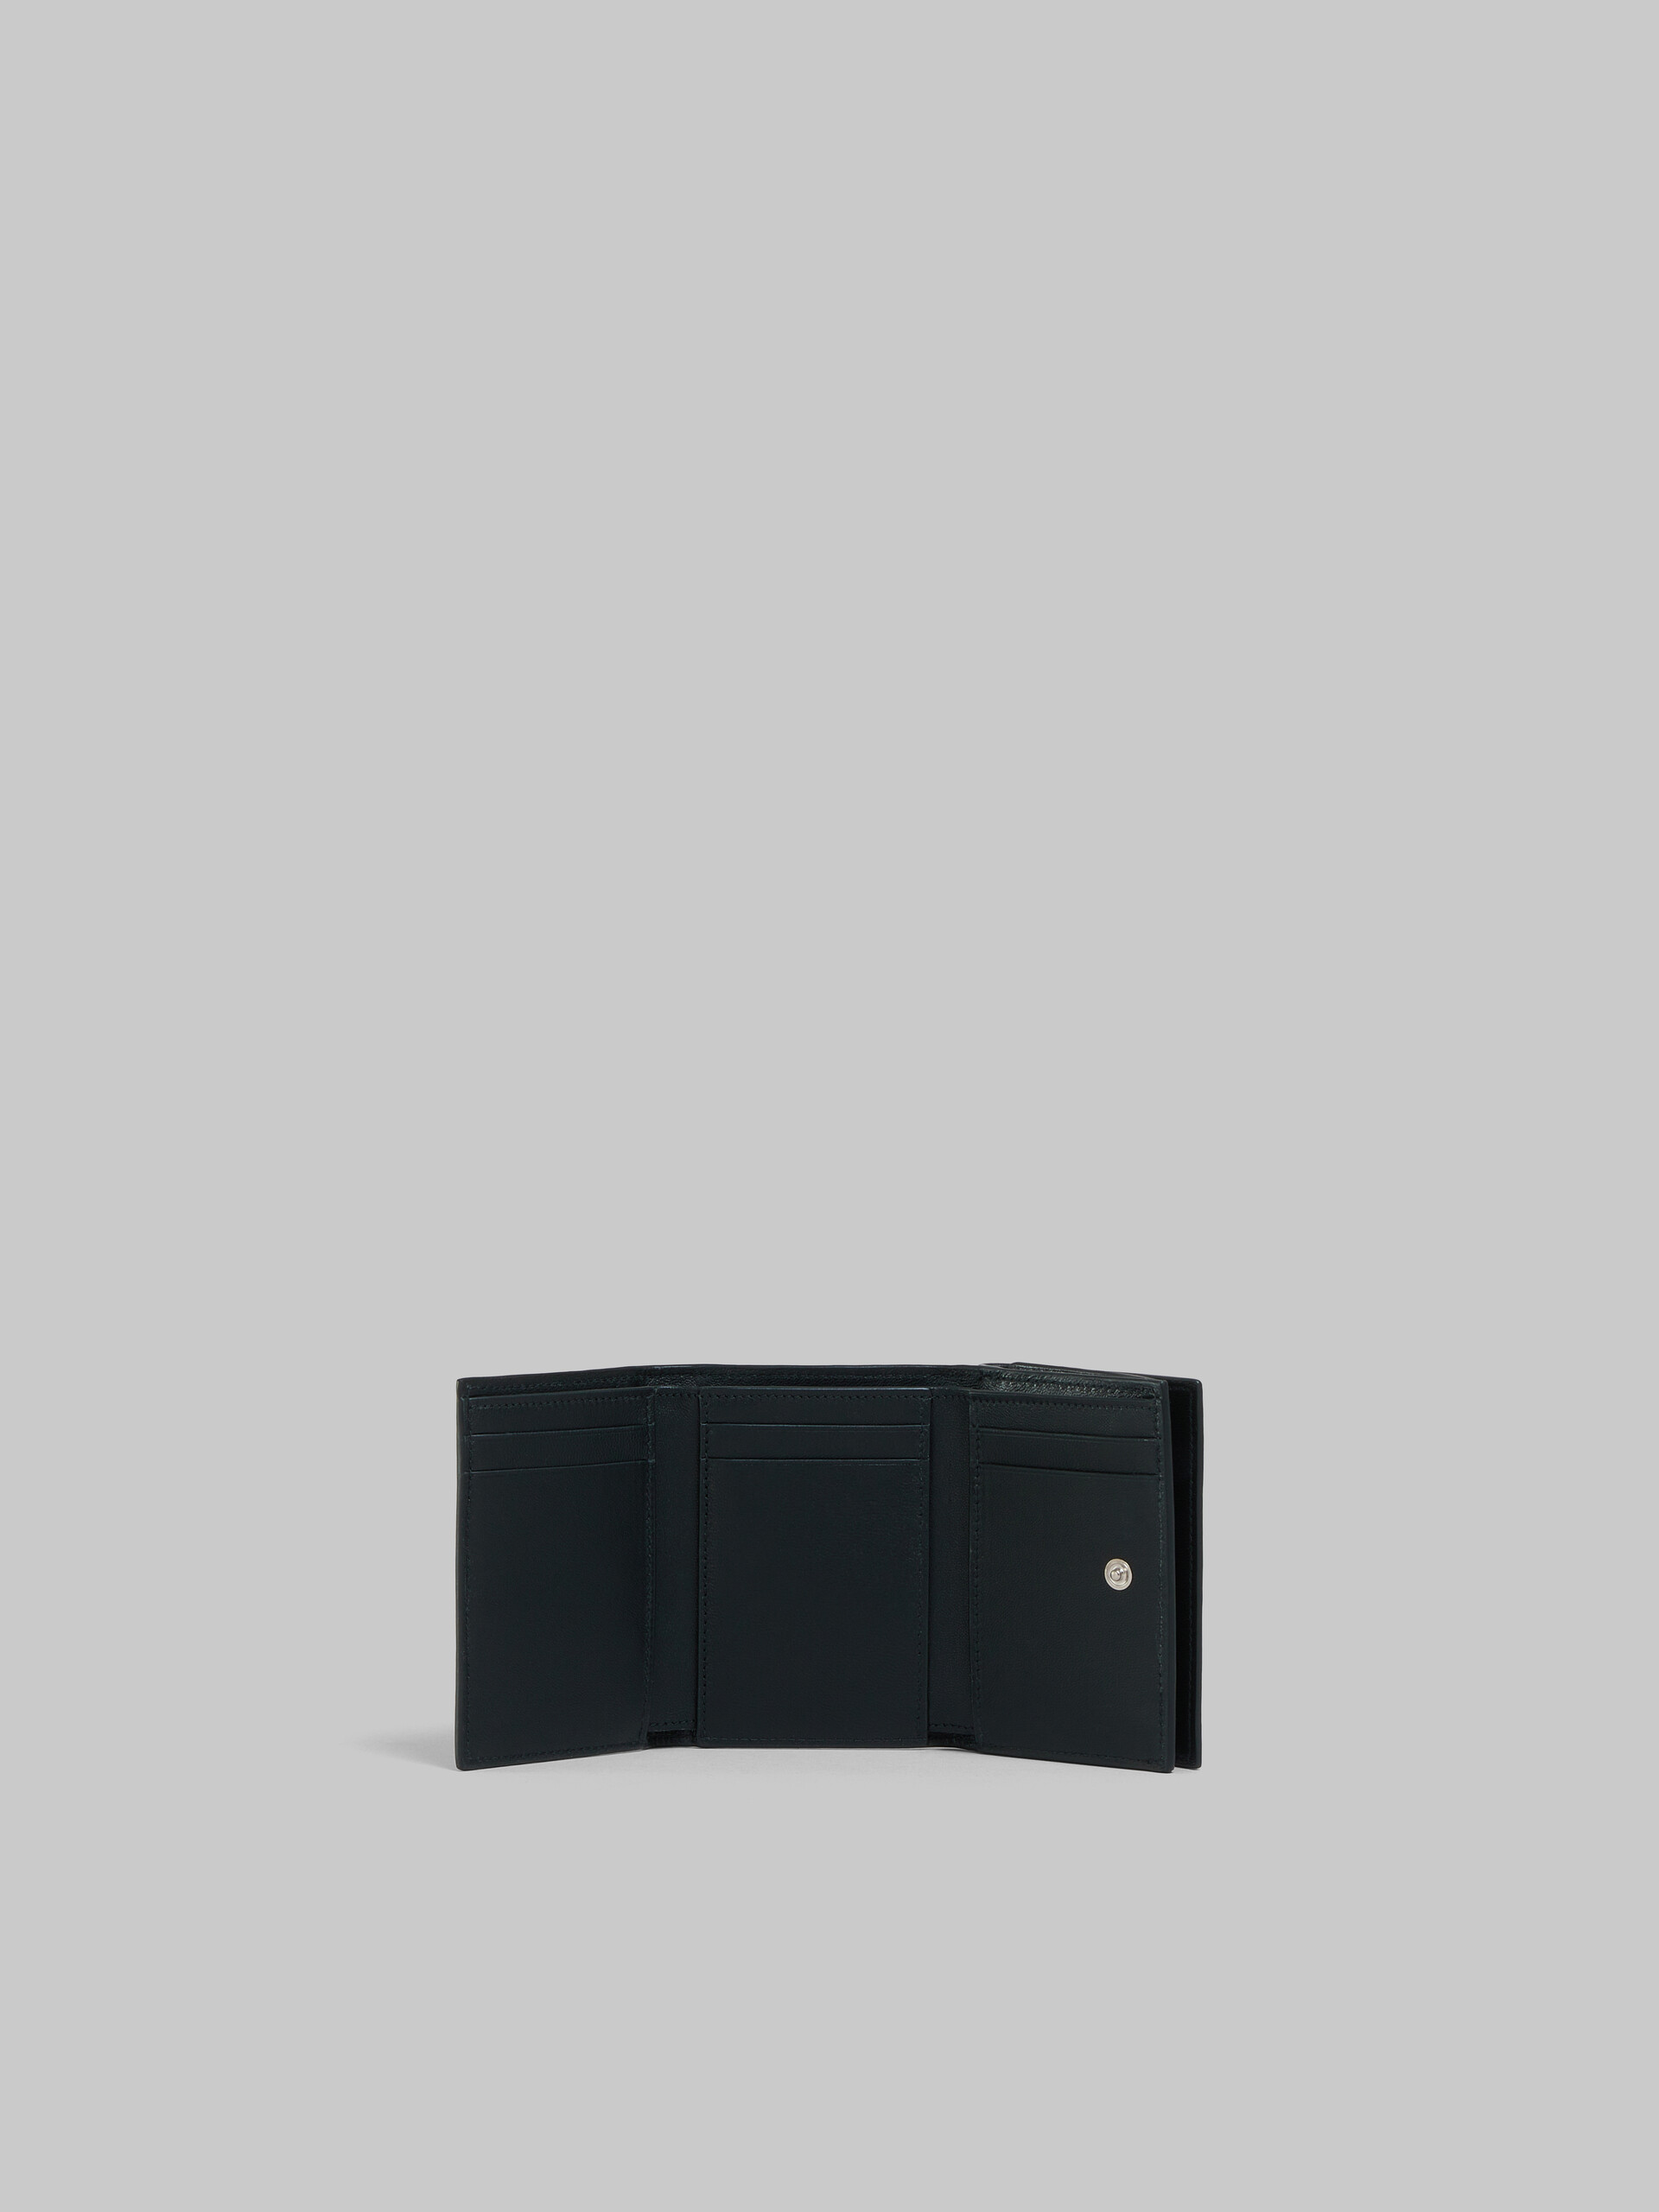 Black leather trifold wallet with Marni mending - Wallets - Image 2